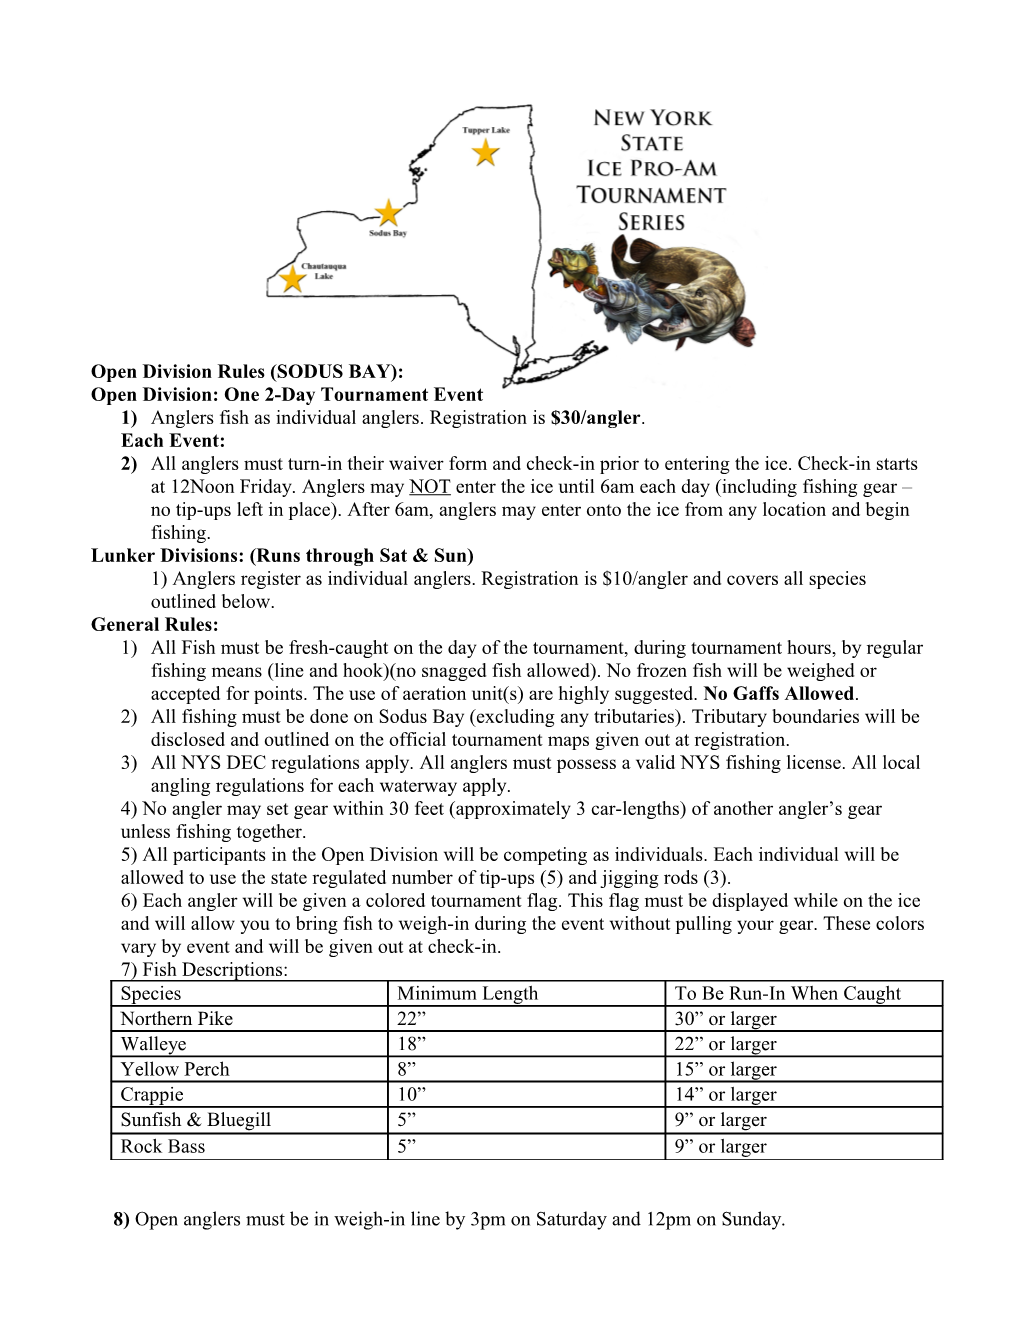 Open Division Rules (SODUS BAY)